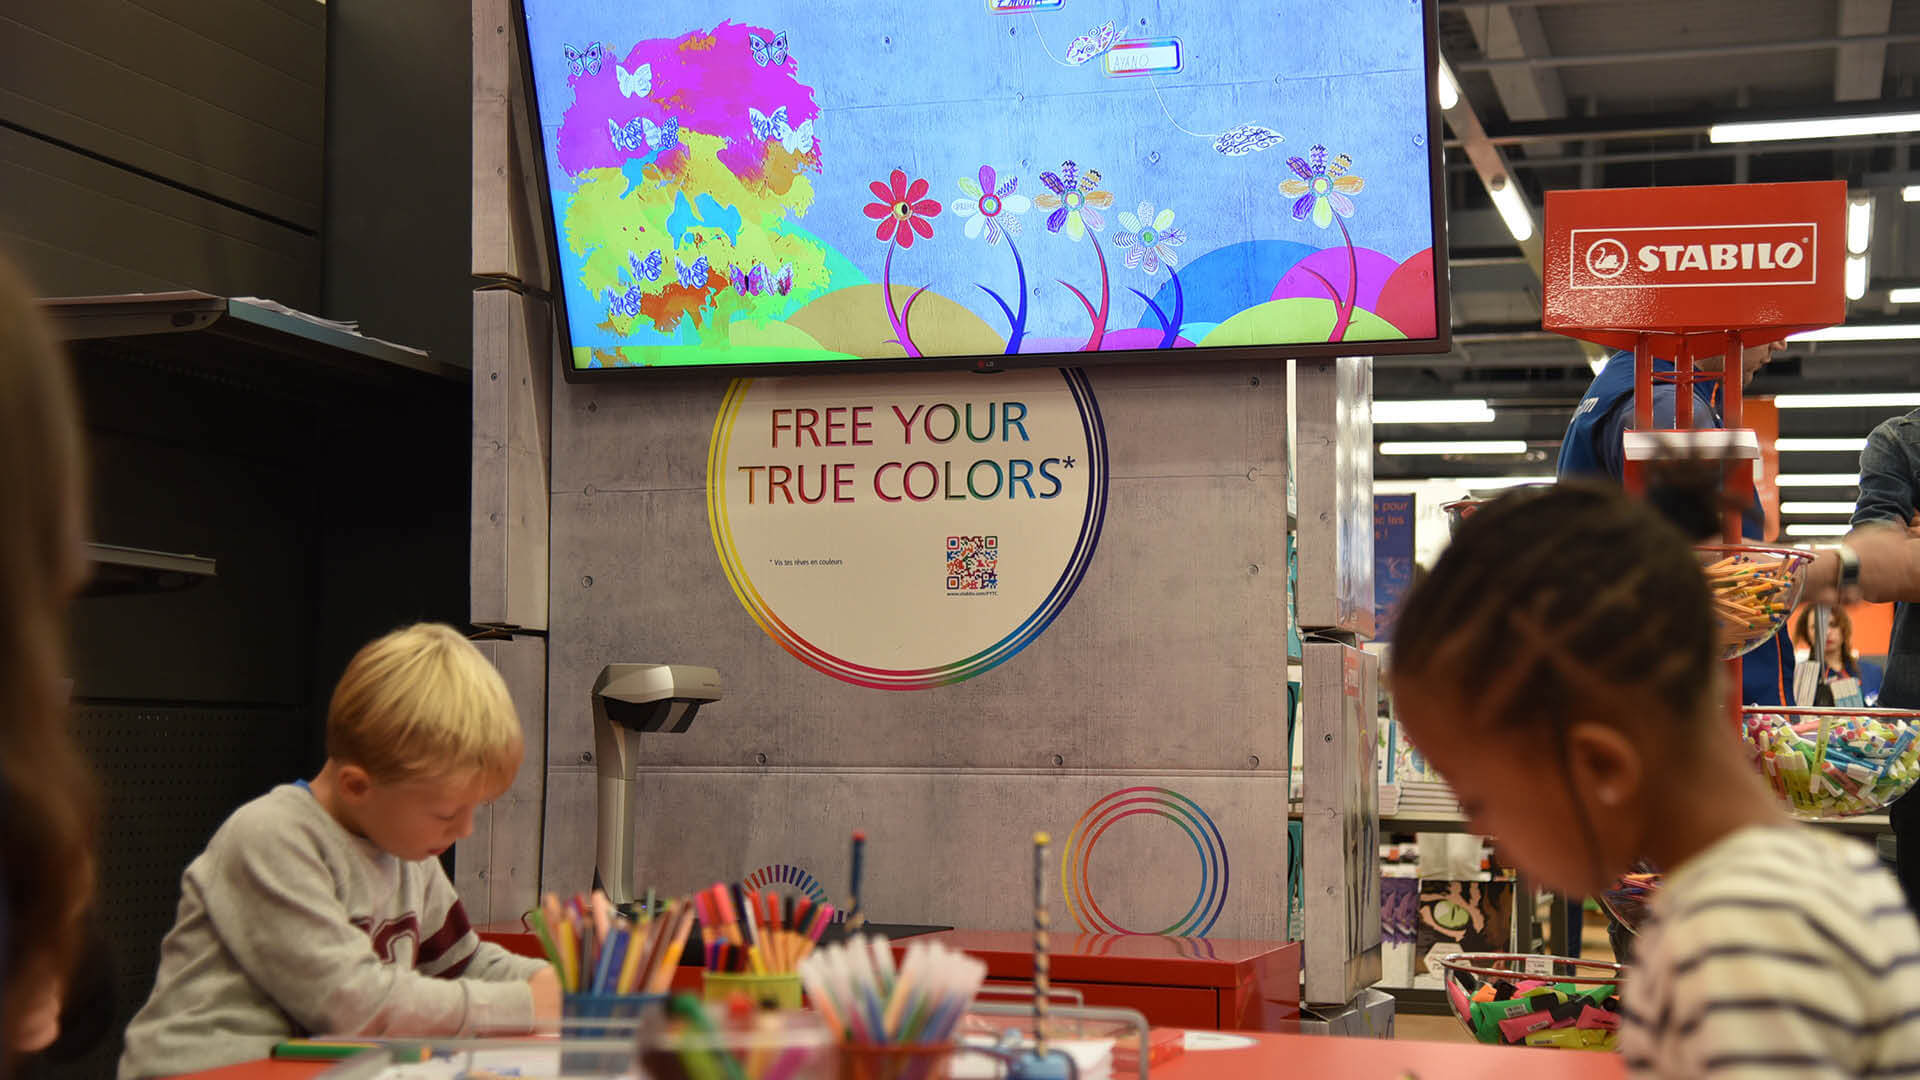 During a Stabilo event, children color butterflies and then scan them to see them come to life on a screen